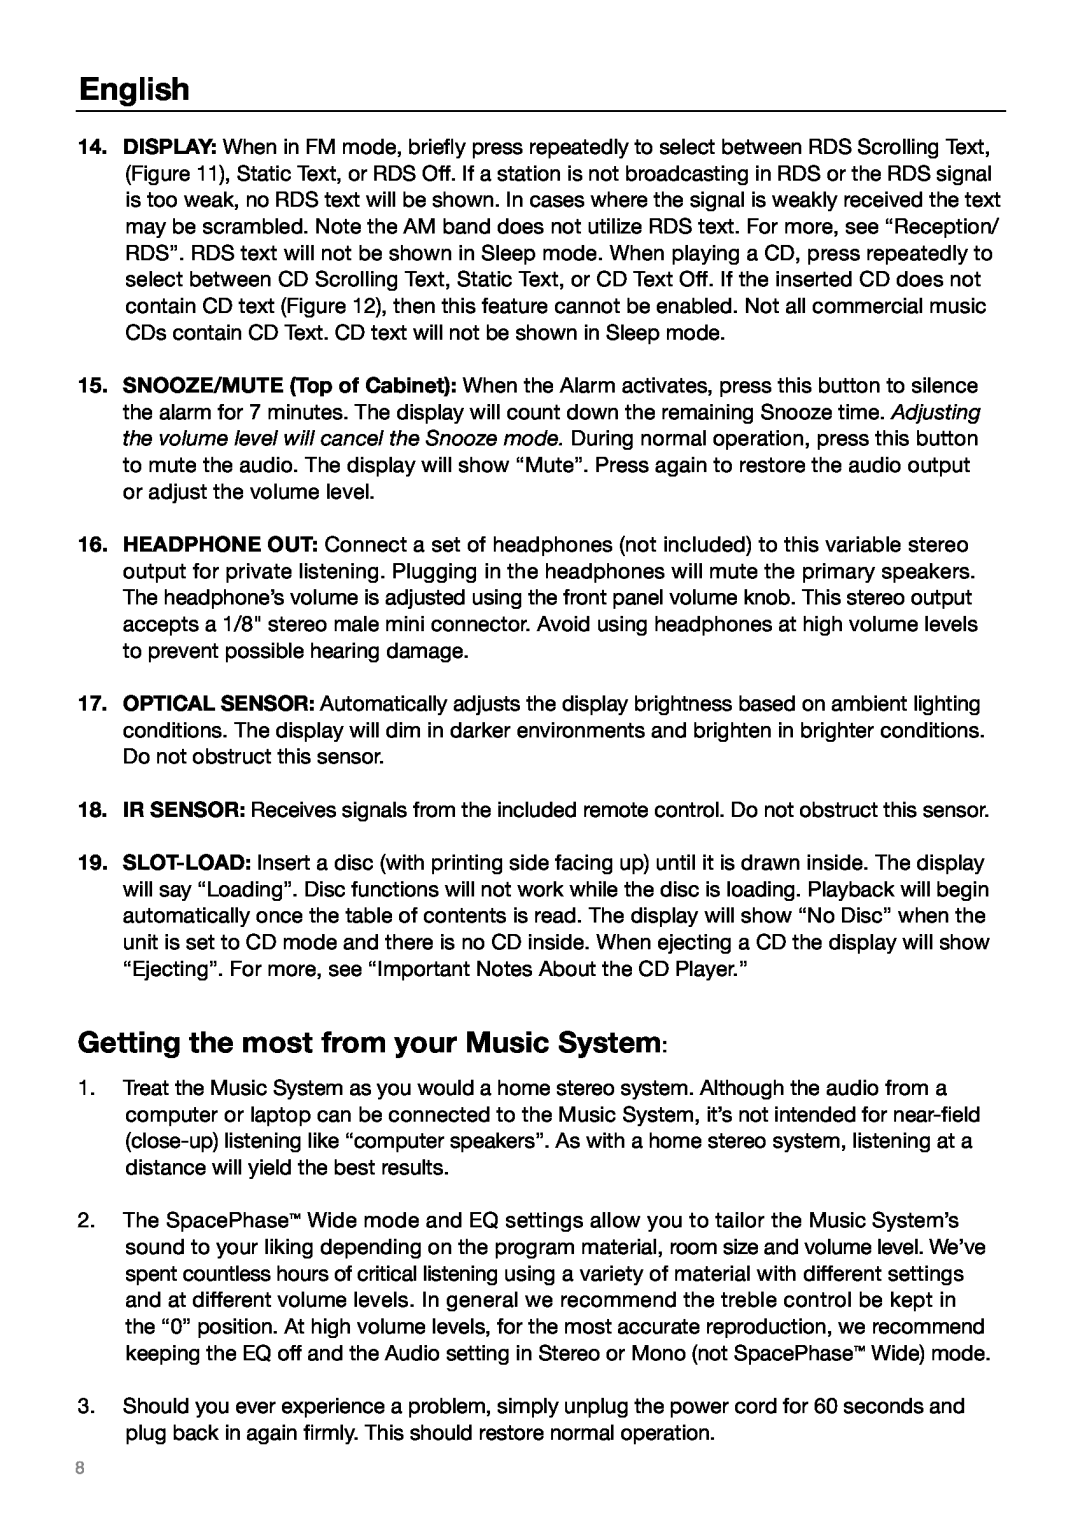 Tivoli Audio MUSIC SYSTEM owner manual Getting the most from your Music System, English 